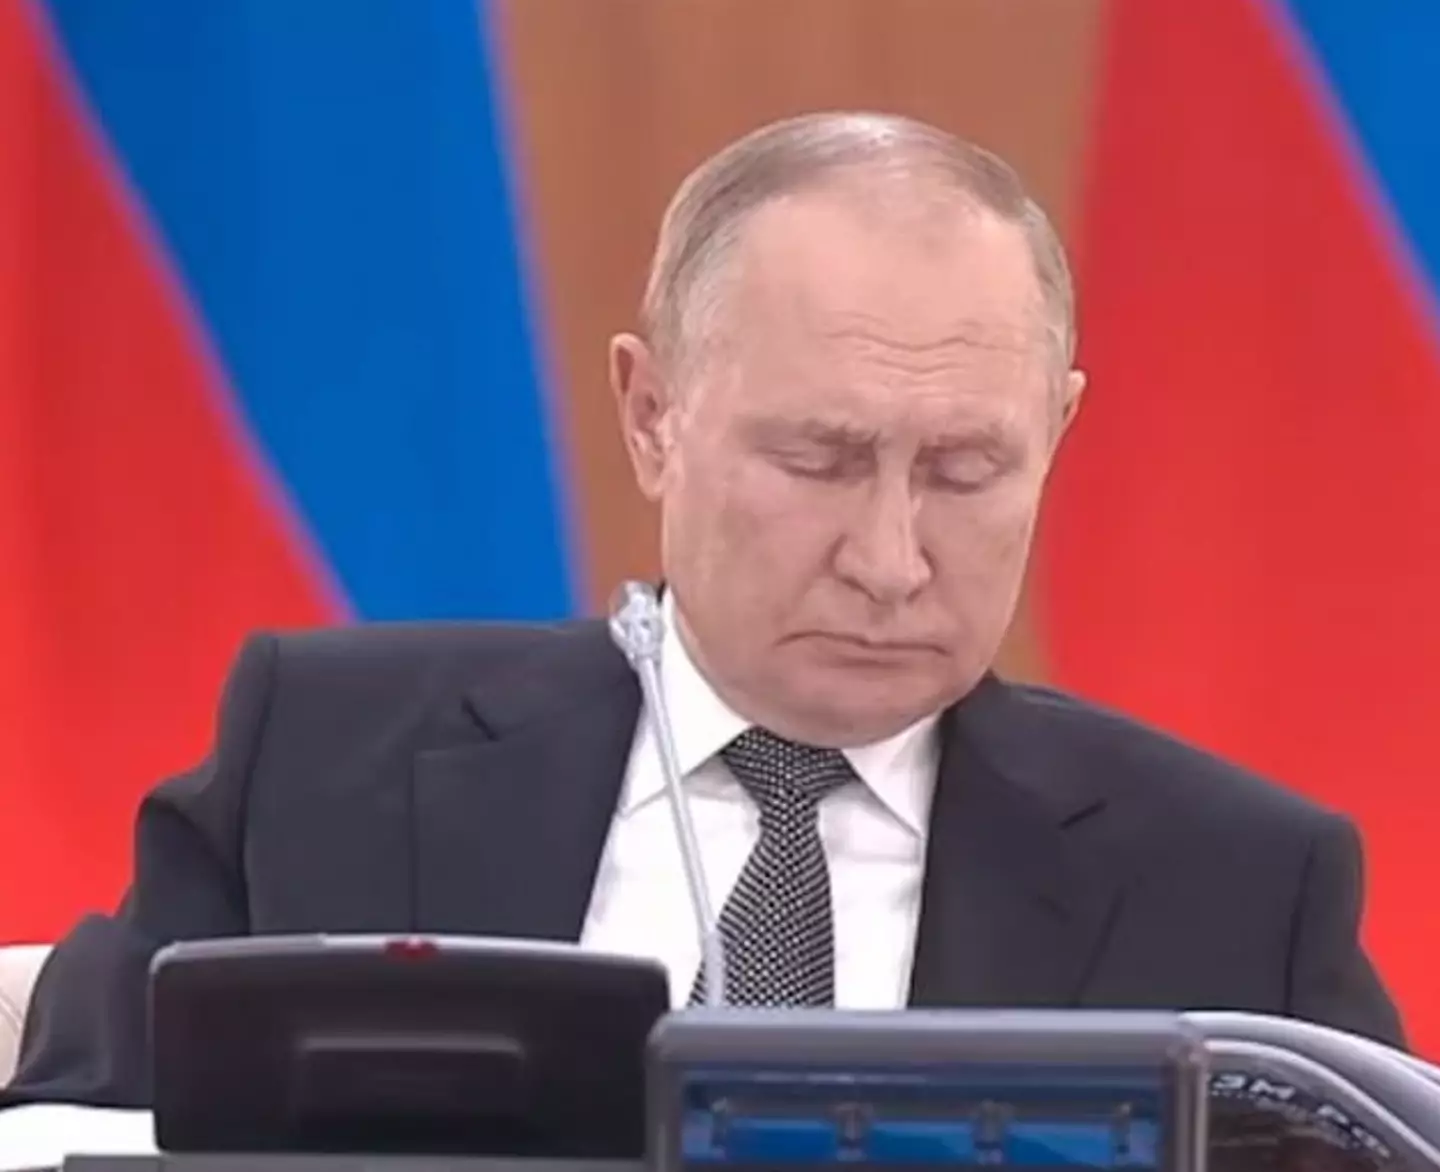 The Russian President looked in some discomfort throughout the meeting.